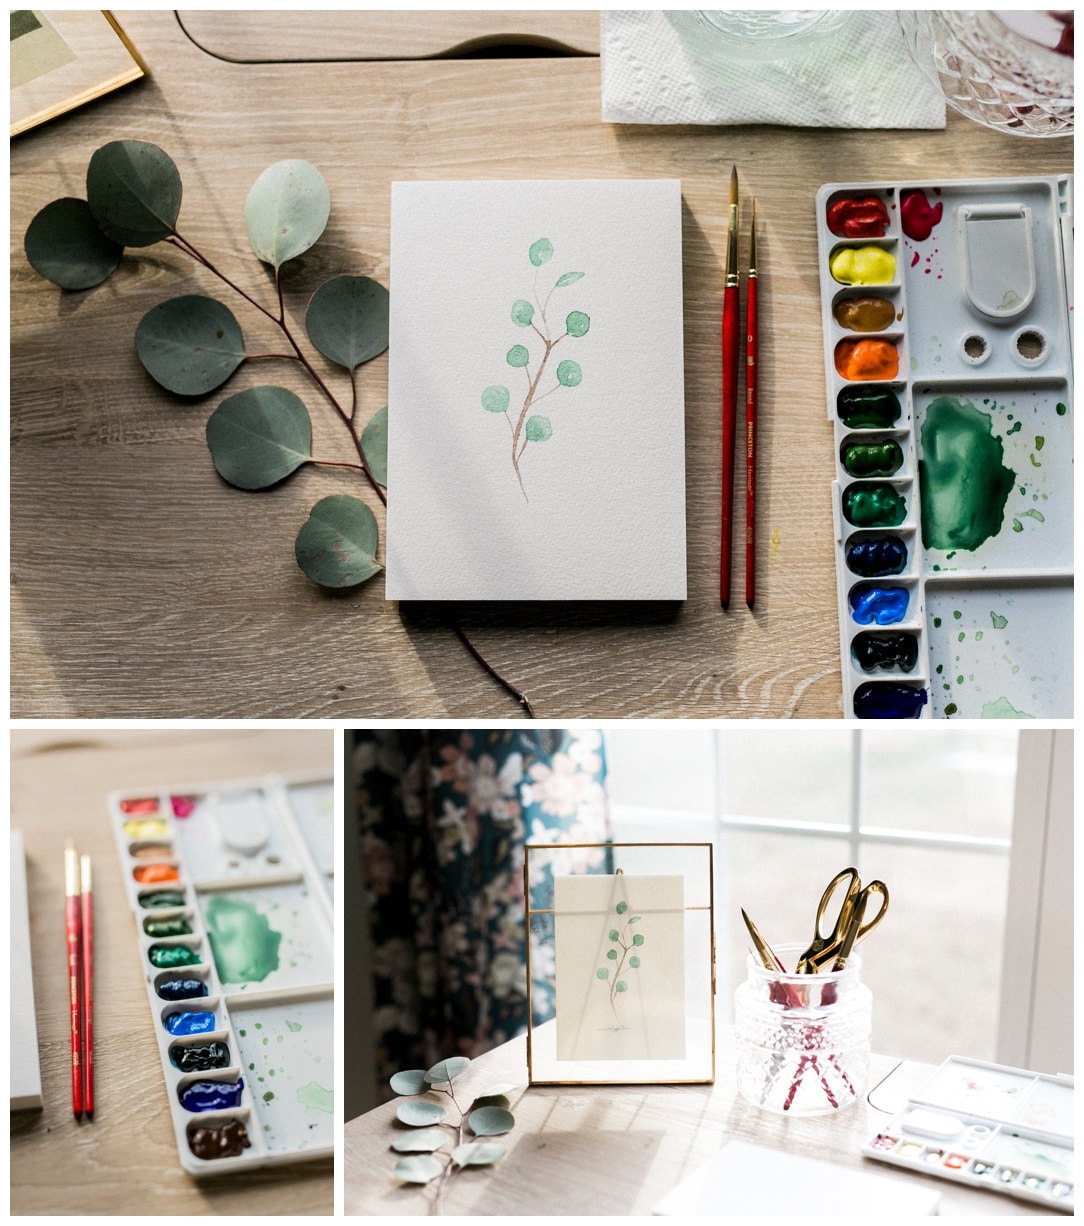 How to paint floral greenery with watercolors